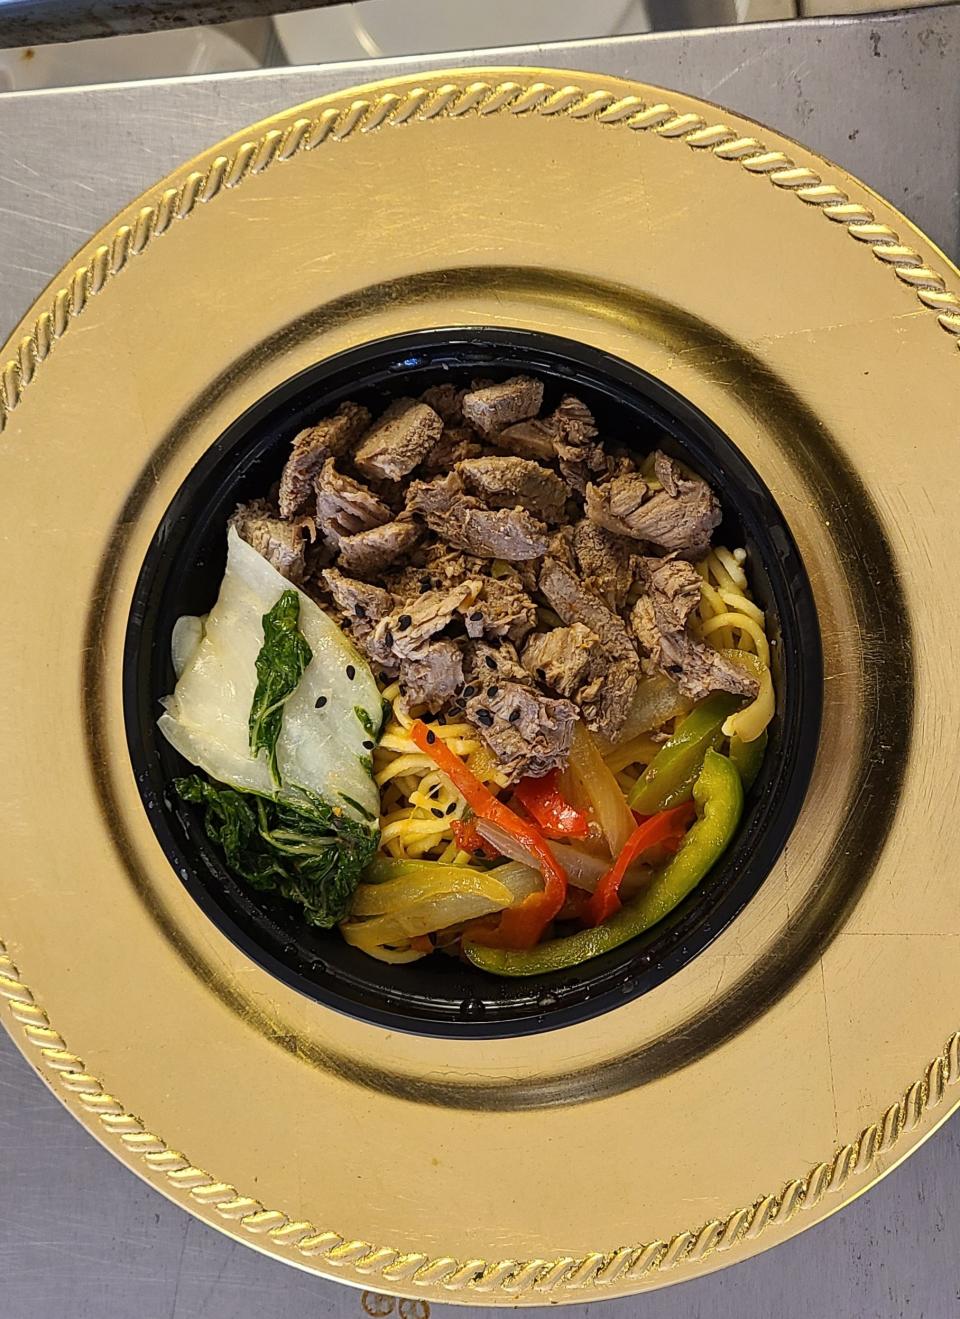 A typical dish for weekly meal service from Chef Global's kitchen averages $10 to $15.